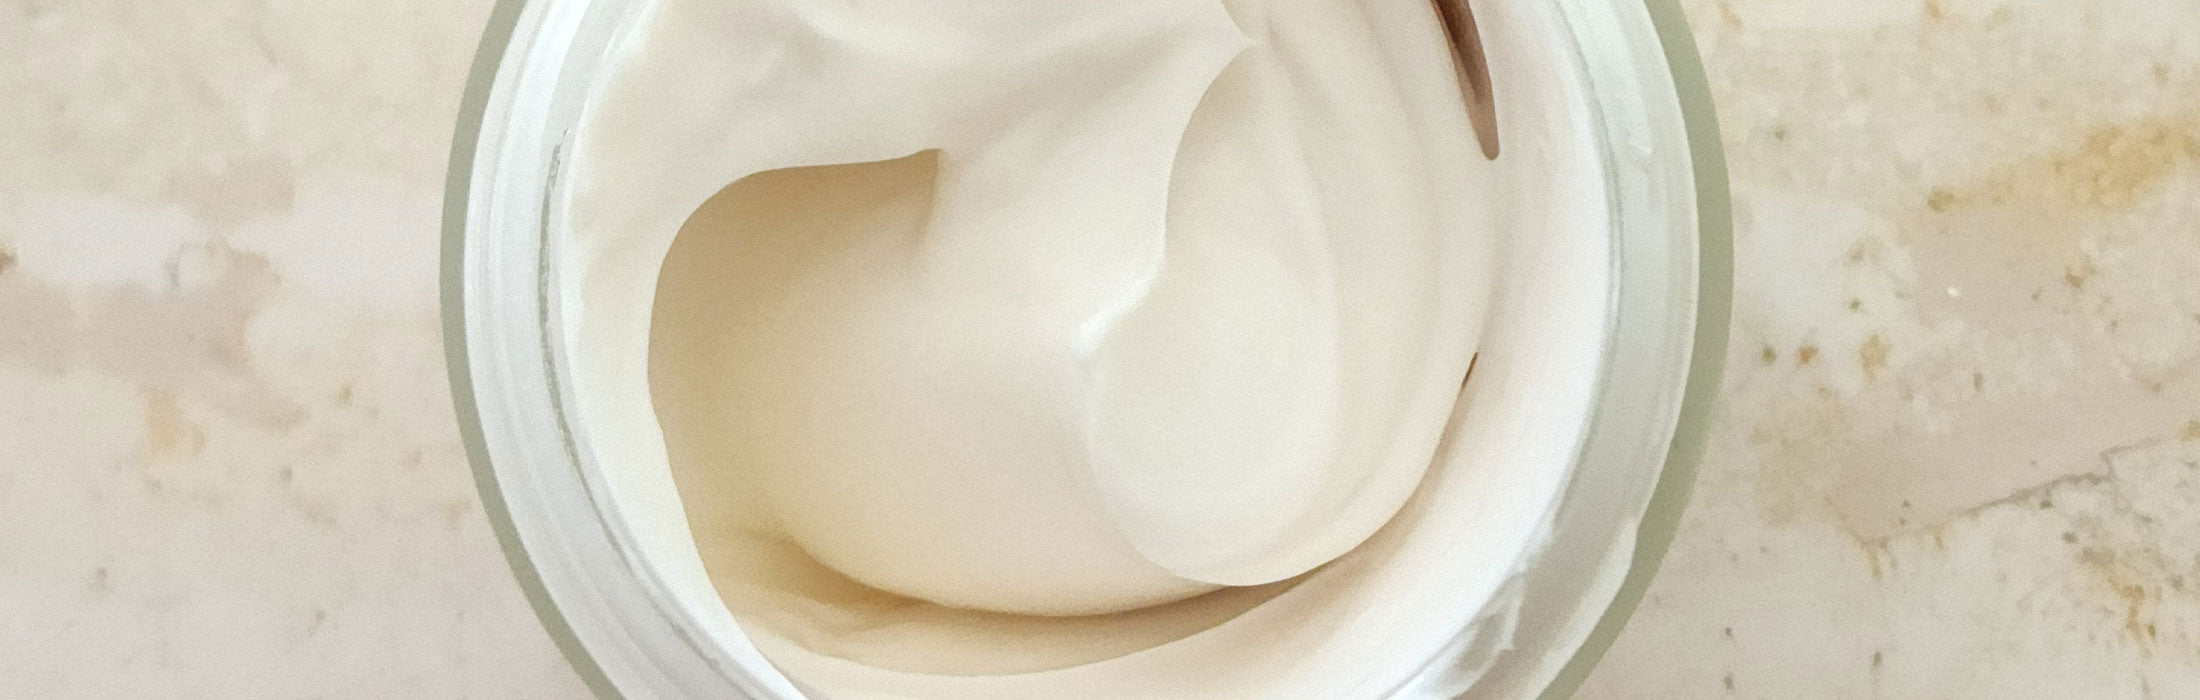 texture of Lavender & Manuka Honey Cleansing Cream, a gentle, hydrating cleanser from Carol Priest's natural, organic cosmetics line., in this detailed product image.